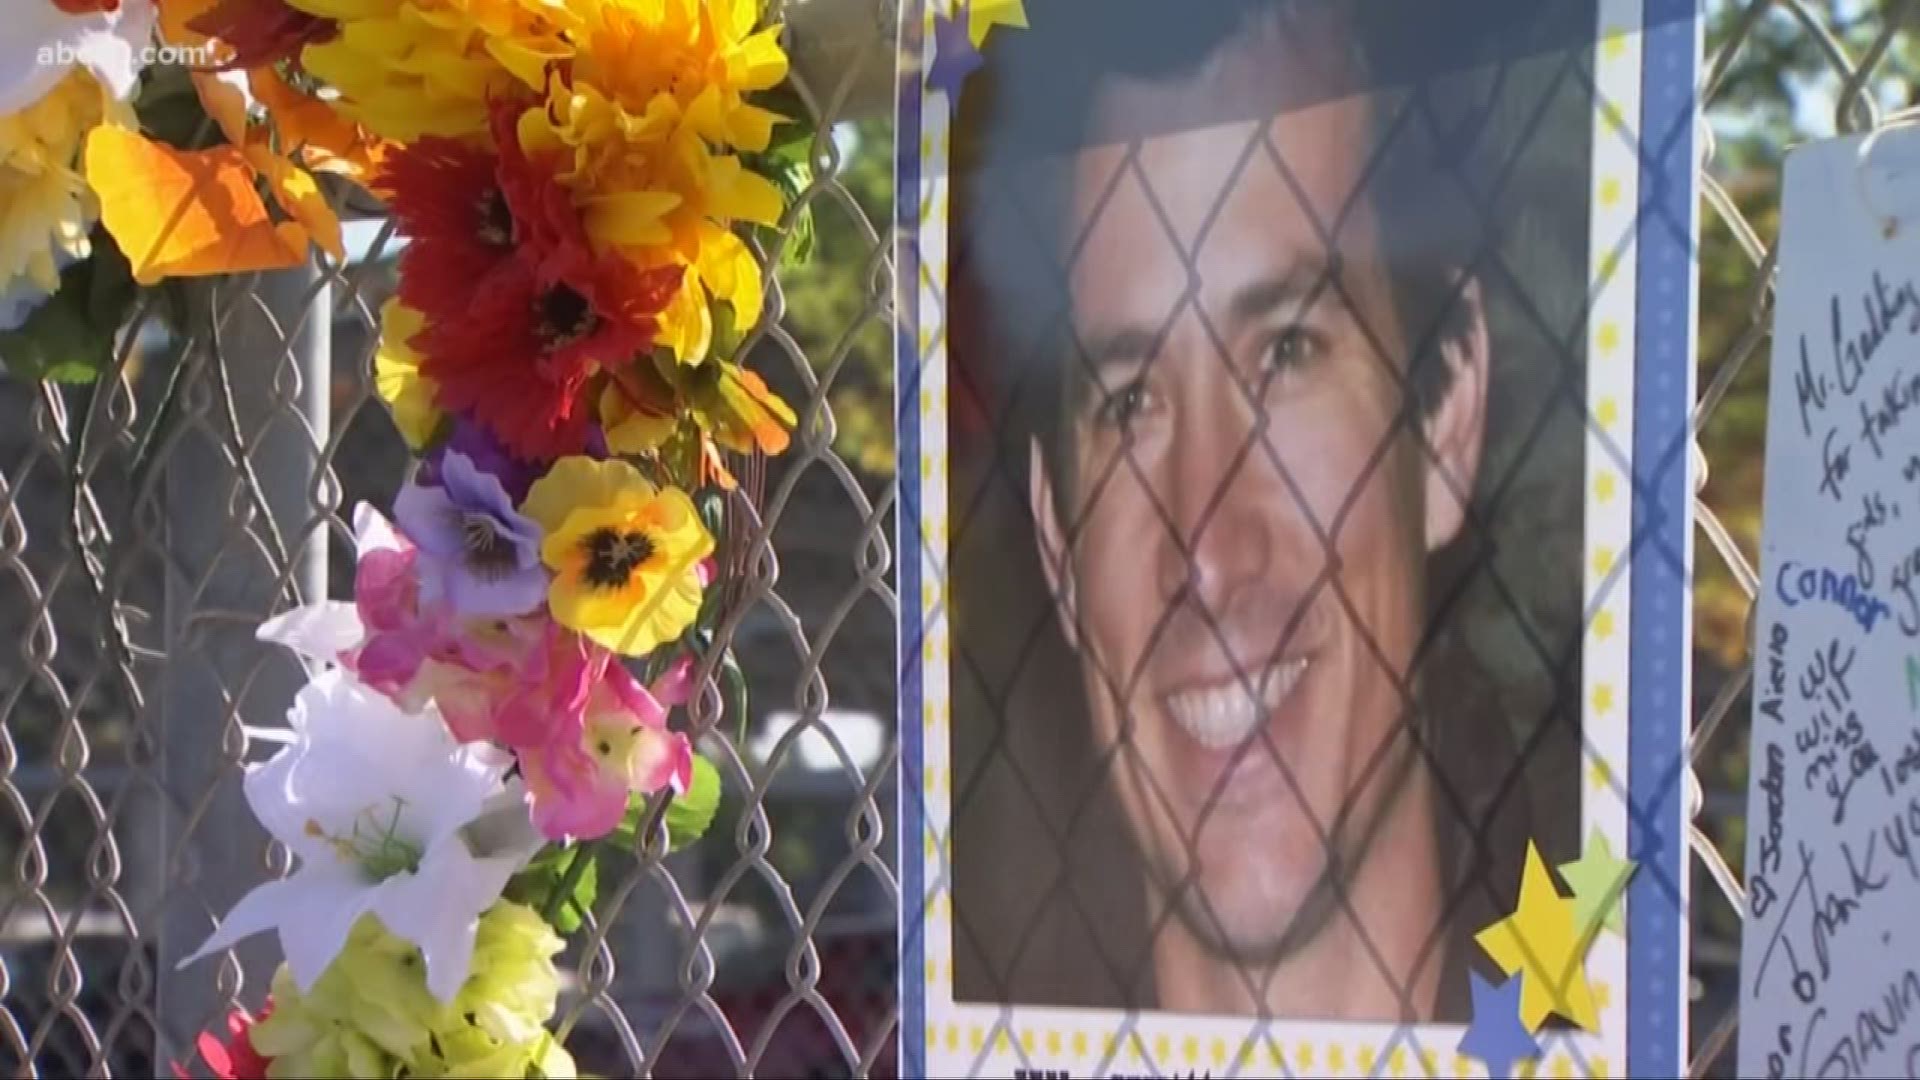 The proposed law, which is named after a Fresno man who died in a hit-and-run crash, would add a harsher punishment for those who leave the scene of a crash.